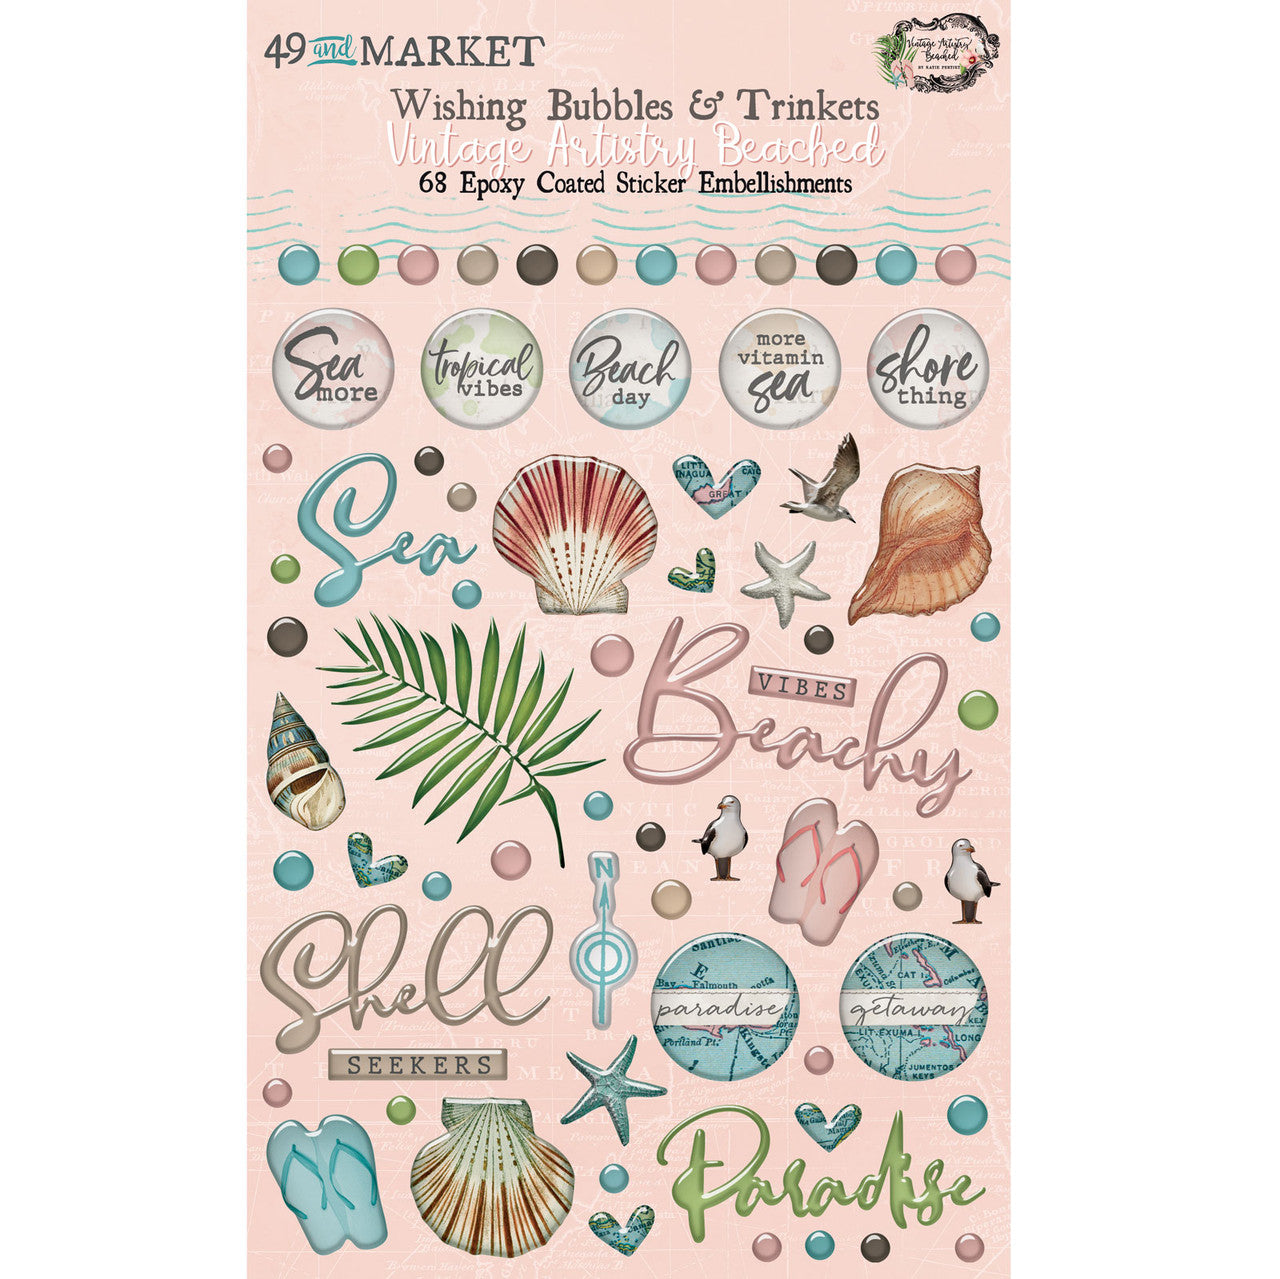 49 and Market Vintage Artistry Beached Wishing Bubbles and Trinkets